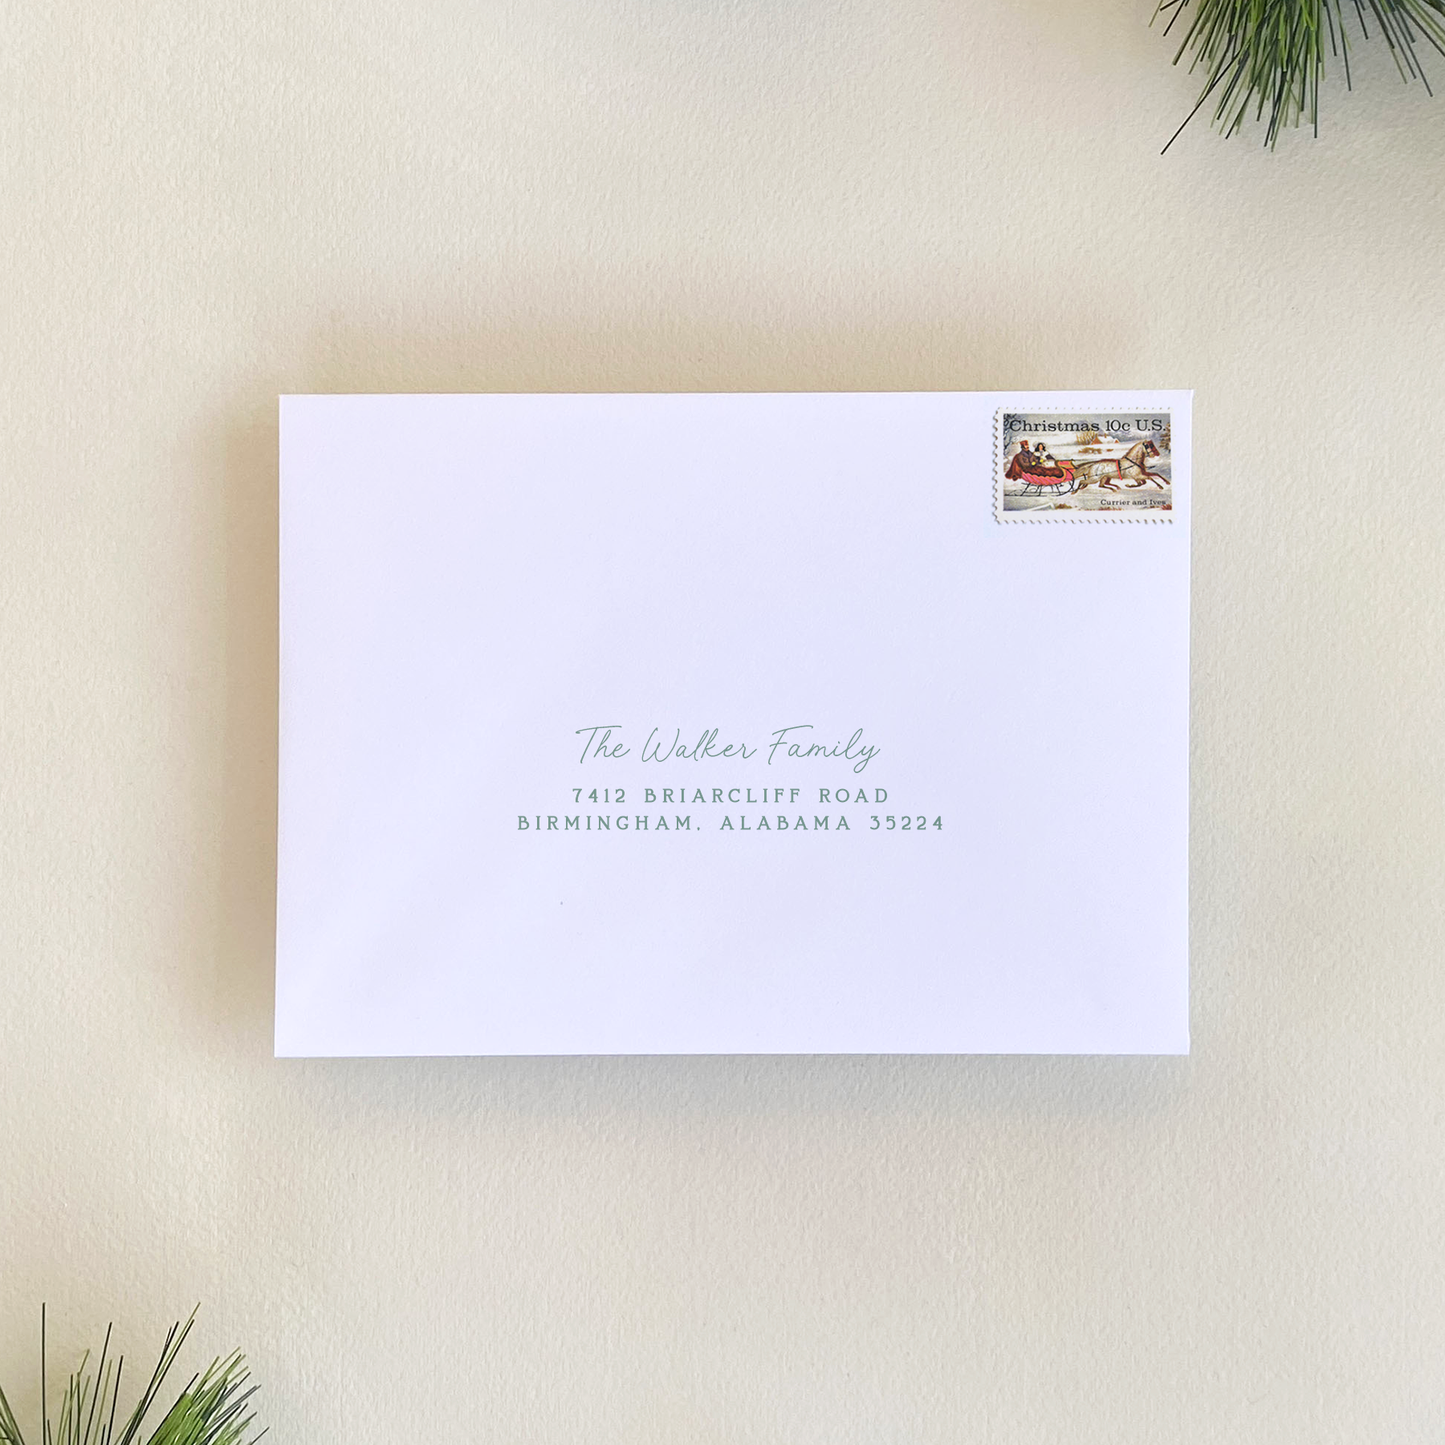 Dotted Pine Holiday Card Address Printing, Evergreen Fog